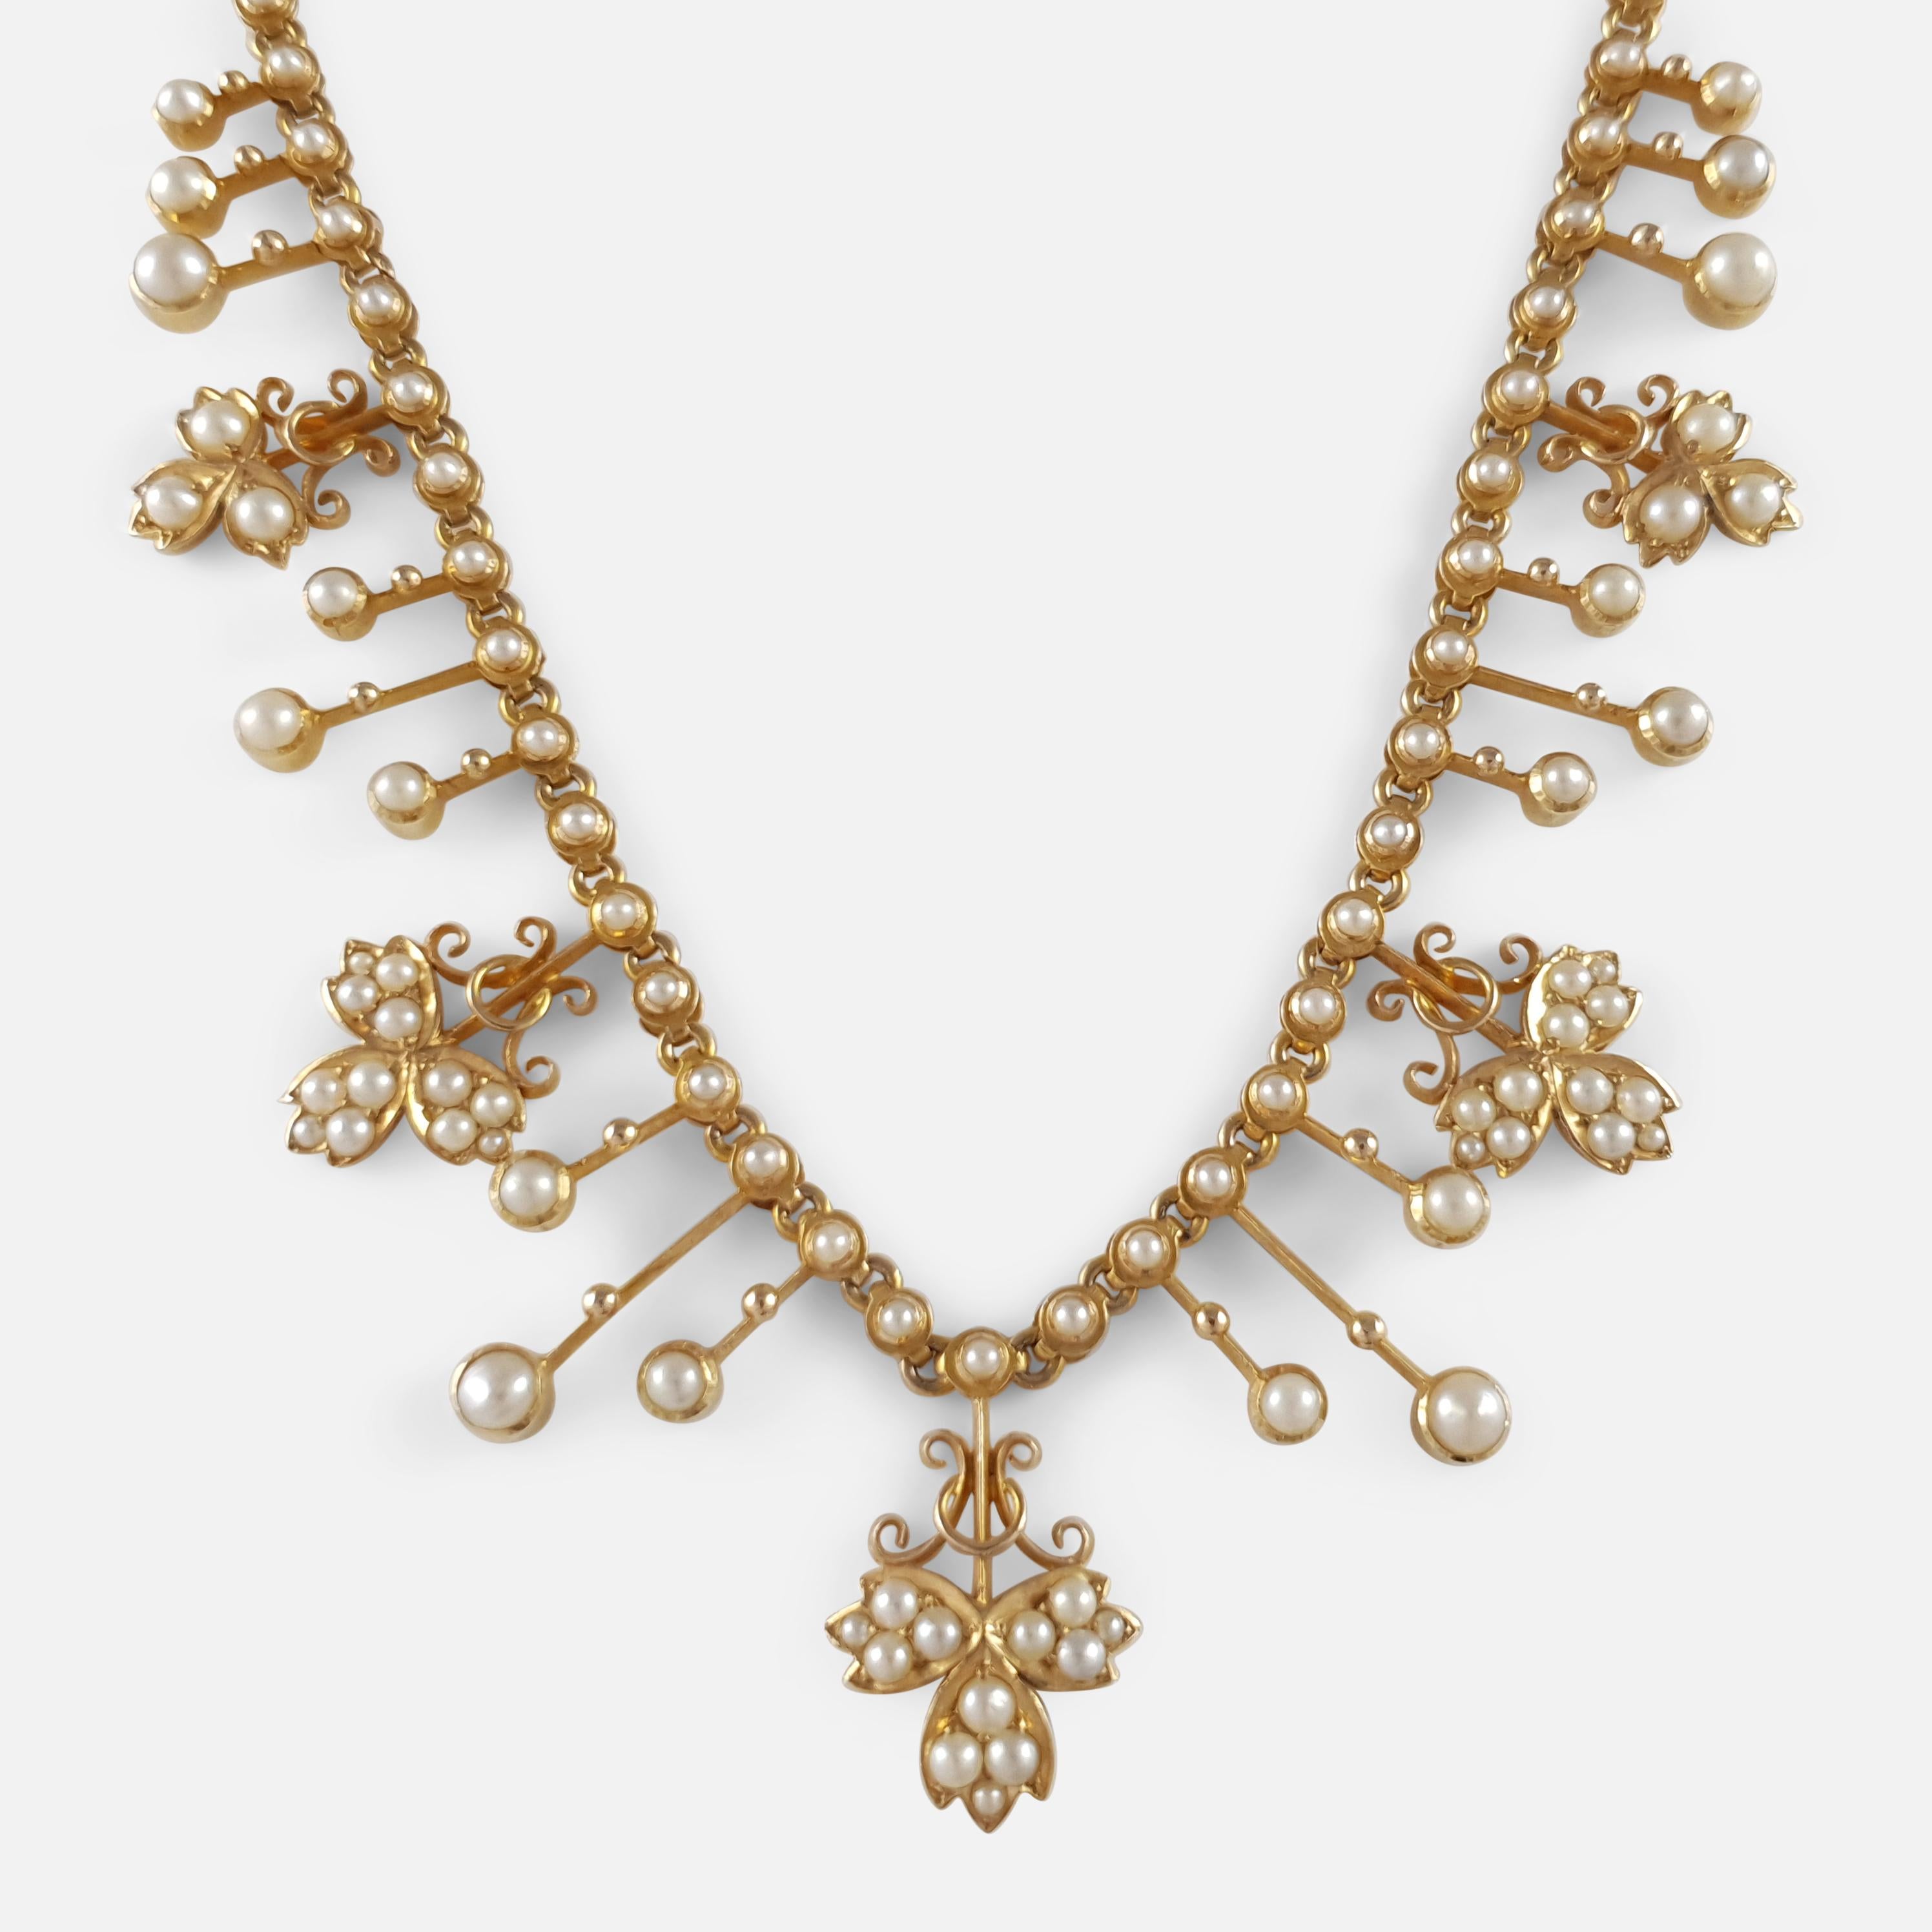 Description: - This is a fine antique Edwardian 15 karat yellow gold seed pearl necklace. The necklace is crafted with fringe and foliate motifs set with seed pearls, to a chain adorned with a seed pearl to each link, complete with push in clasp.